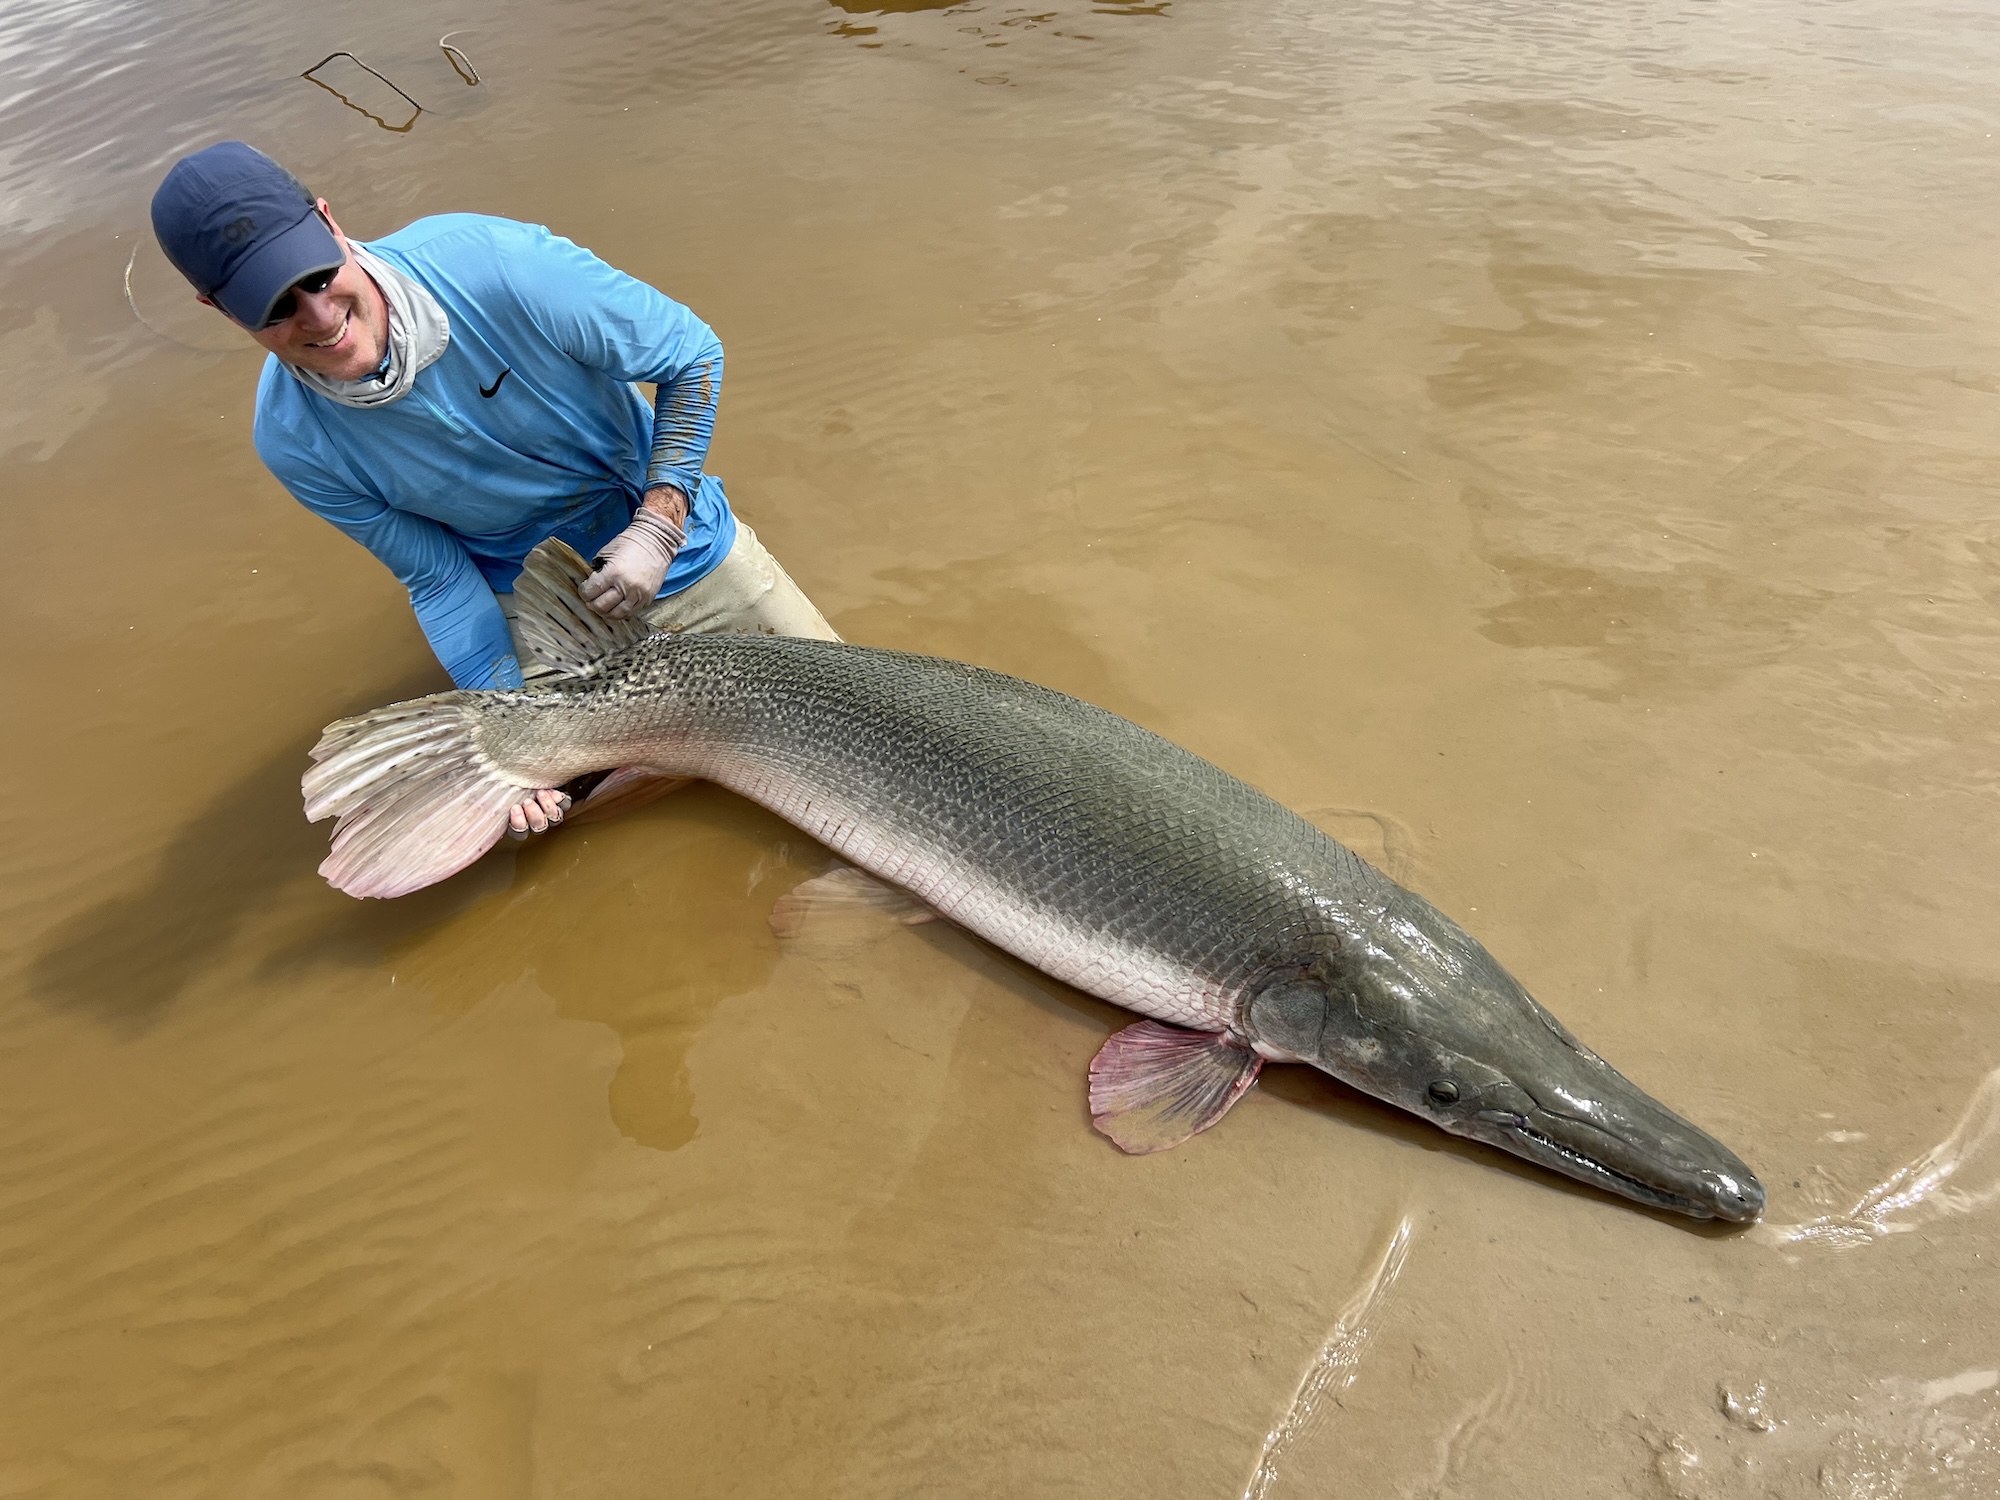 Angler with giant alligator gar in water.